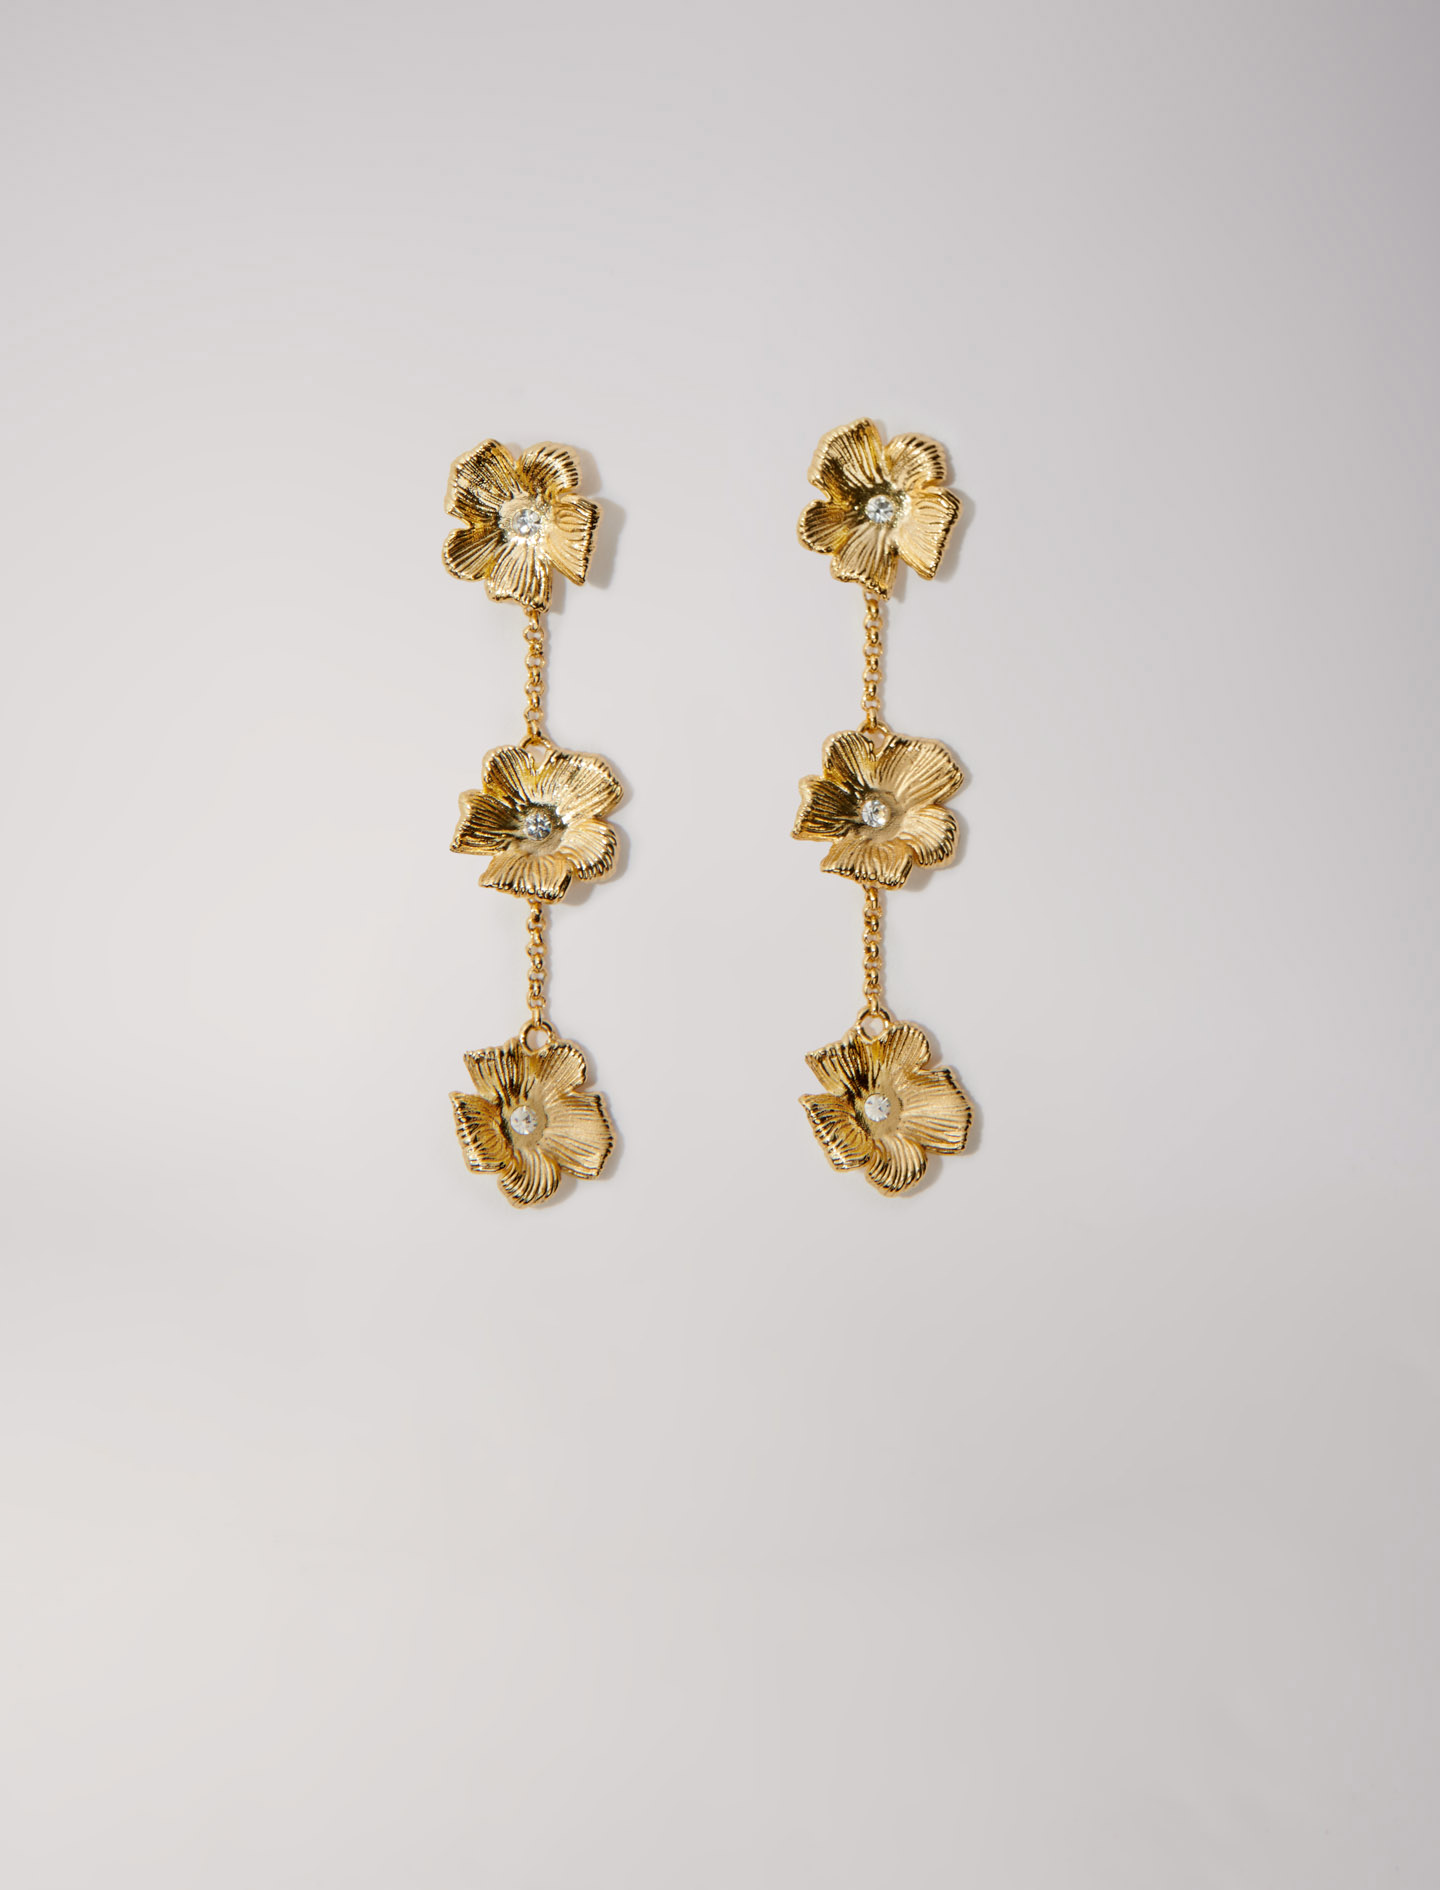 Woman's glass Jewellery: Flower earrings for Spring/Summer, size Woman-Jewelry-OS (ONE SIZE), in color Gold / Yellow